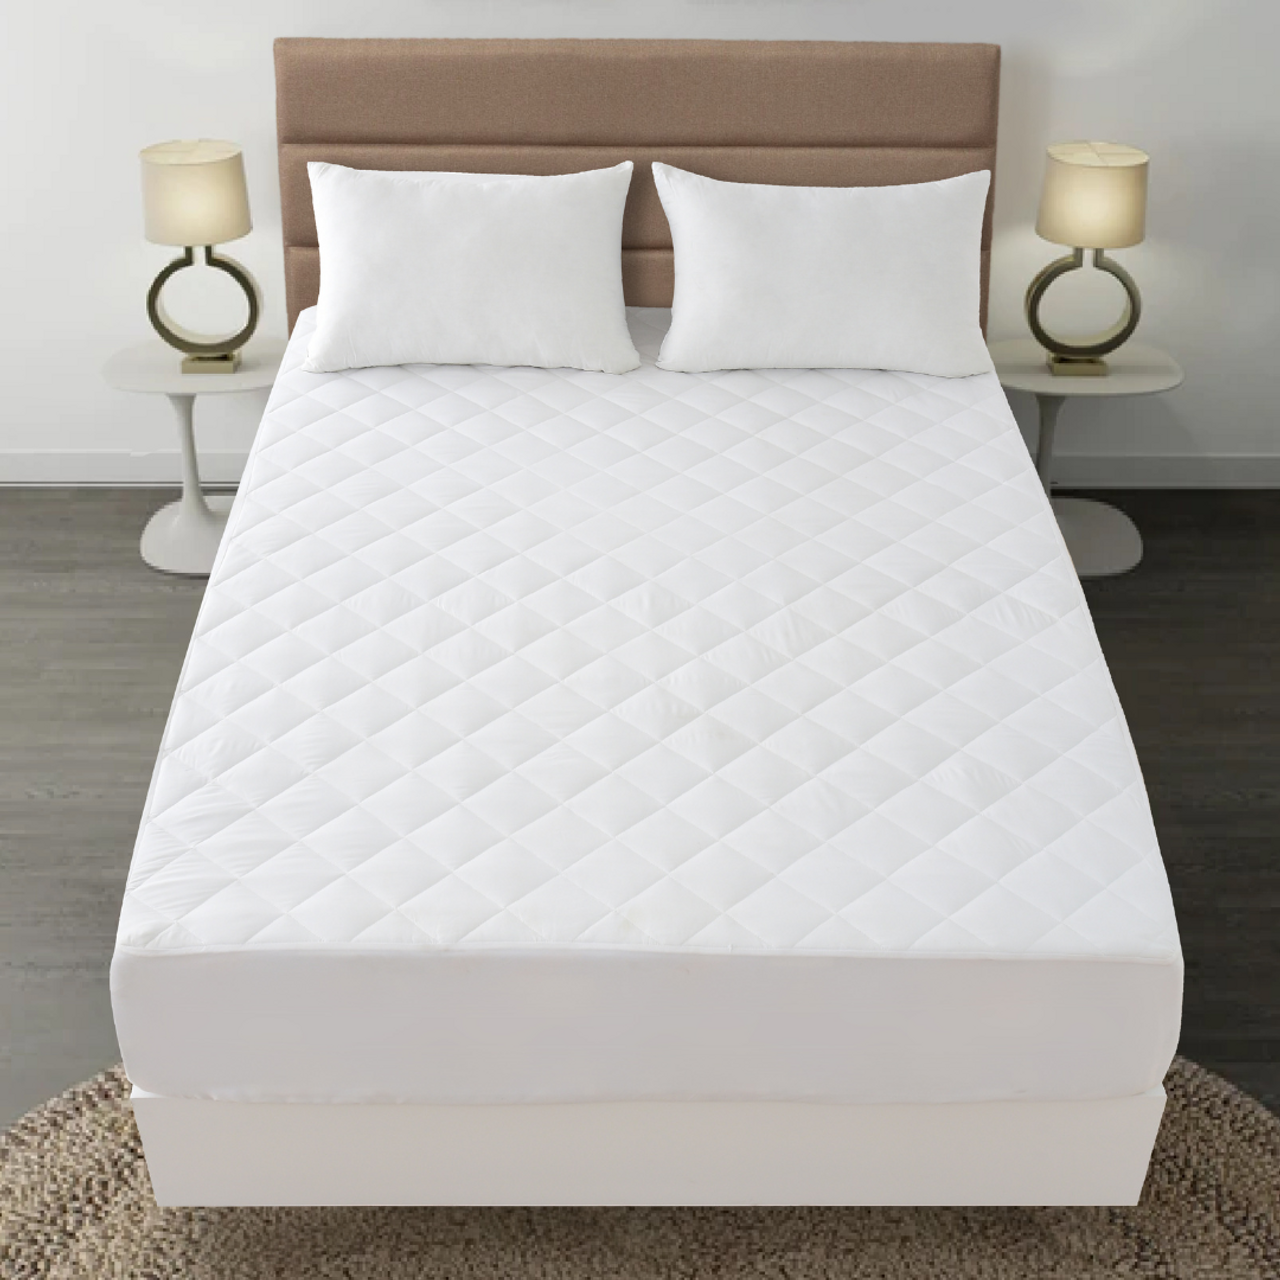 Super Soft Quilted Fitted Mattress Topper product image